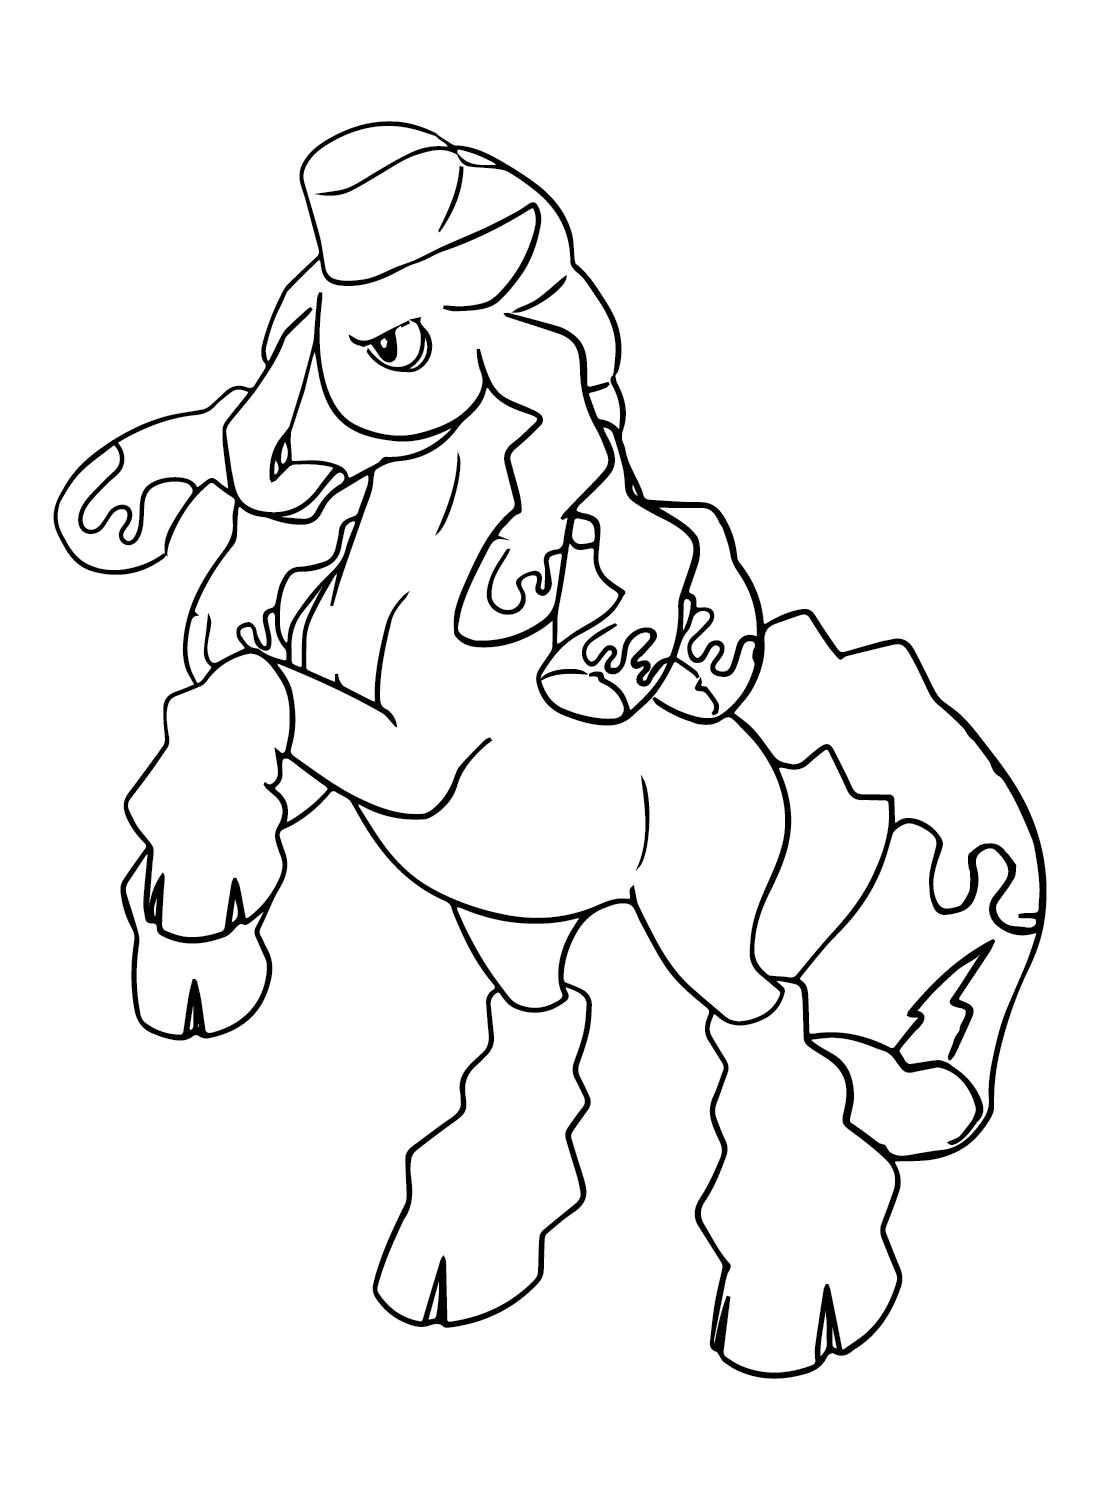 Mudsdale for Kids Coloring Page